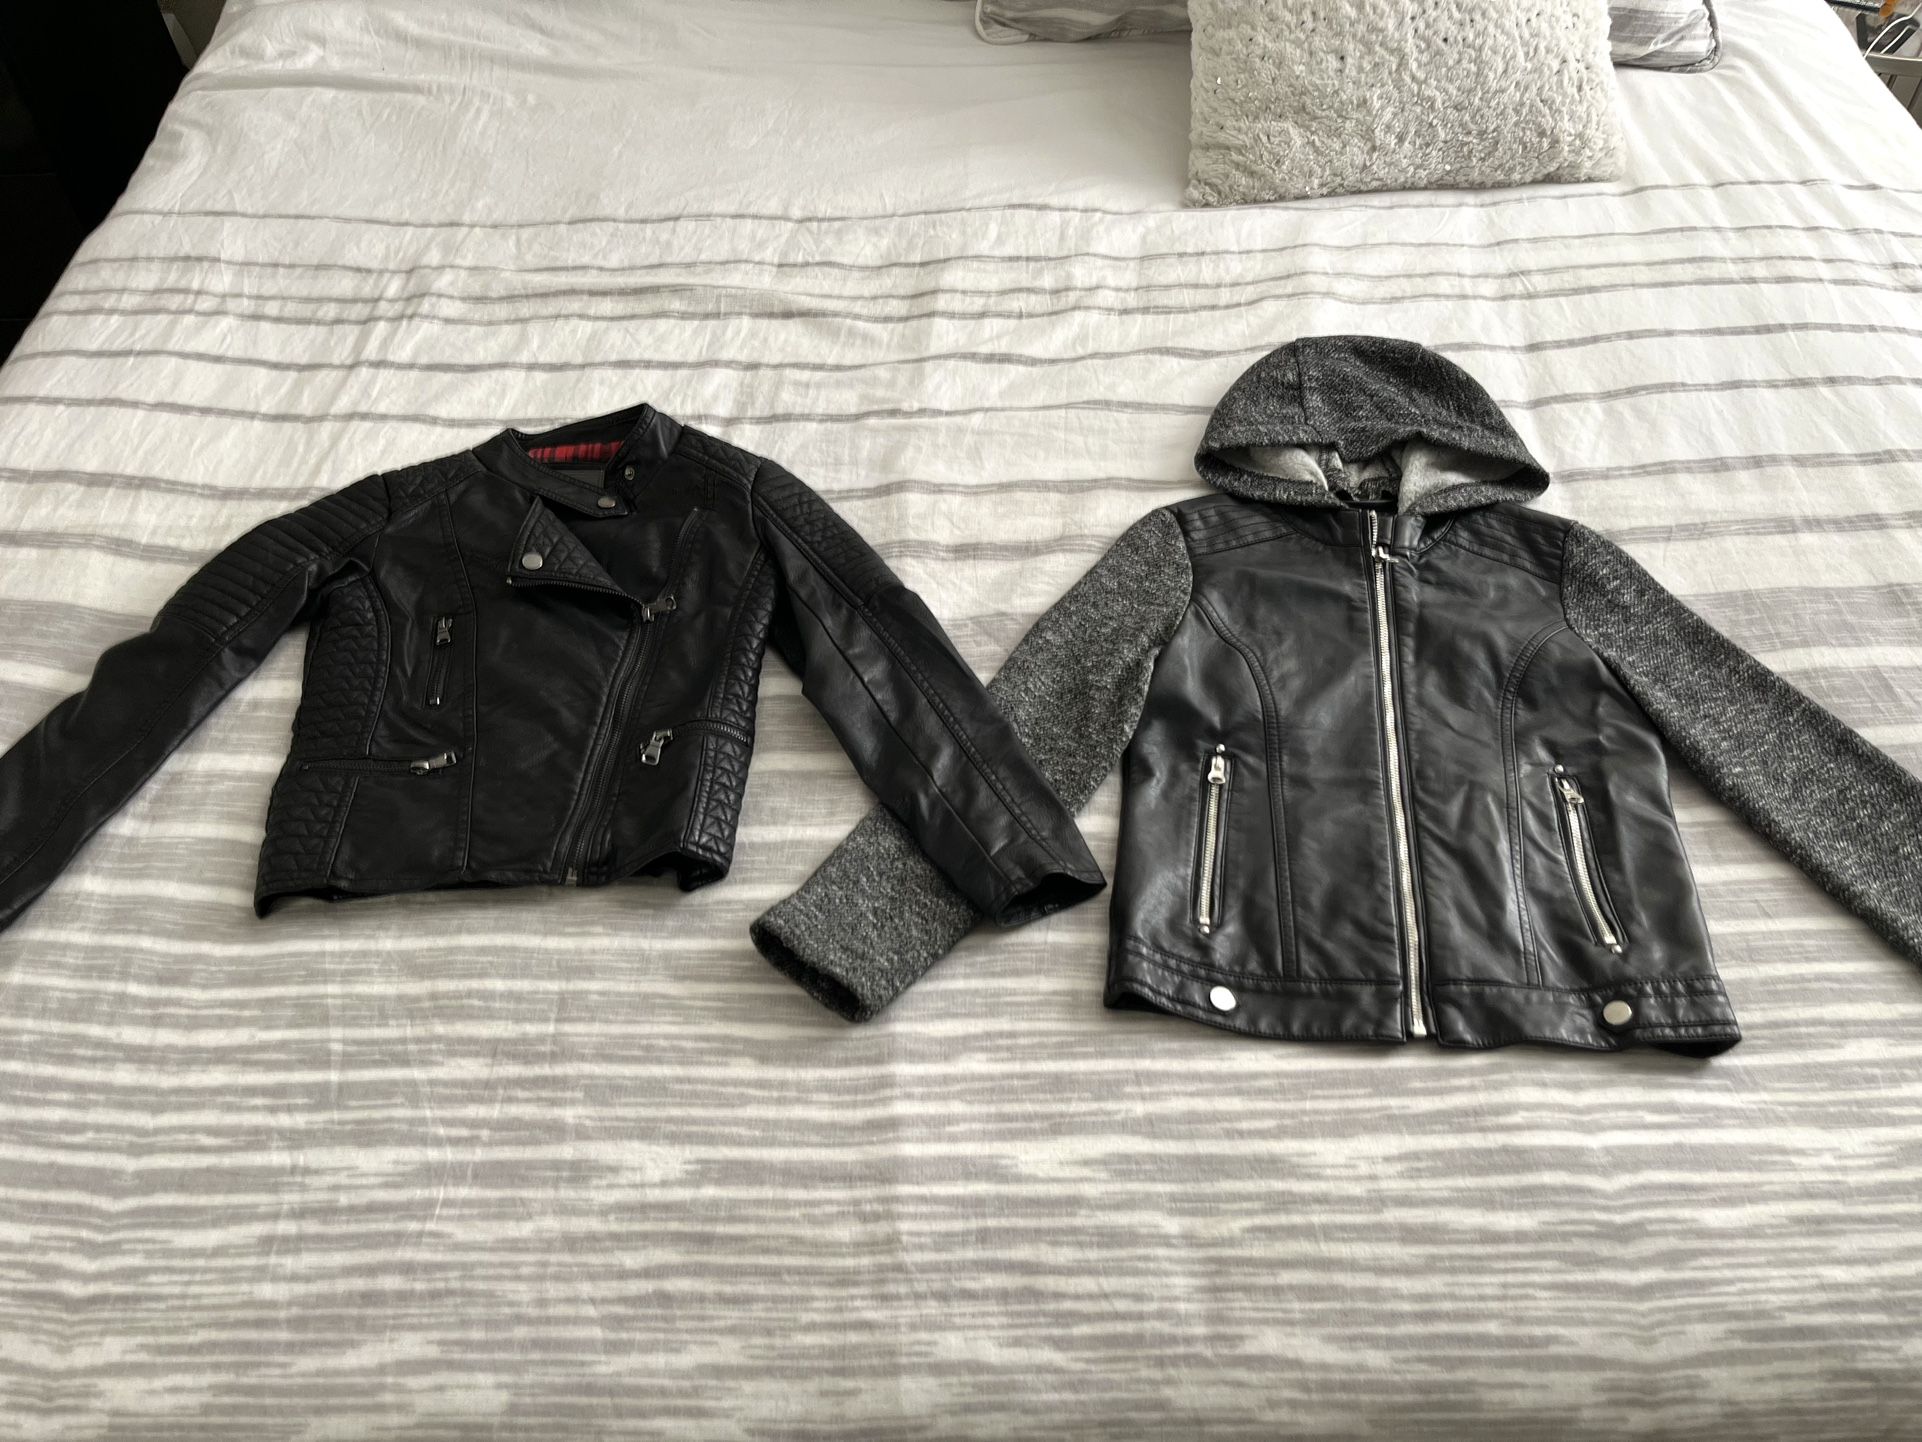 2 NEW GIRLS SIZE 7/8 FAUX LEATHER JACKETS 